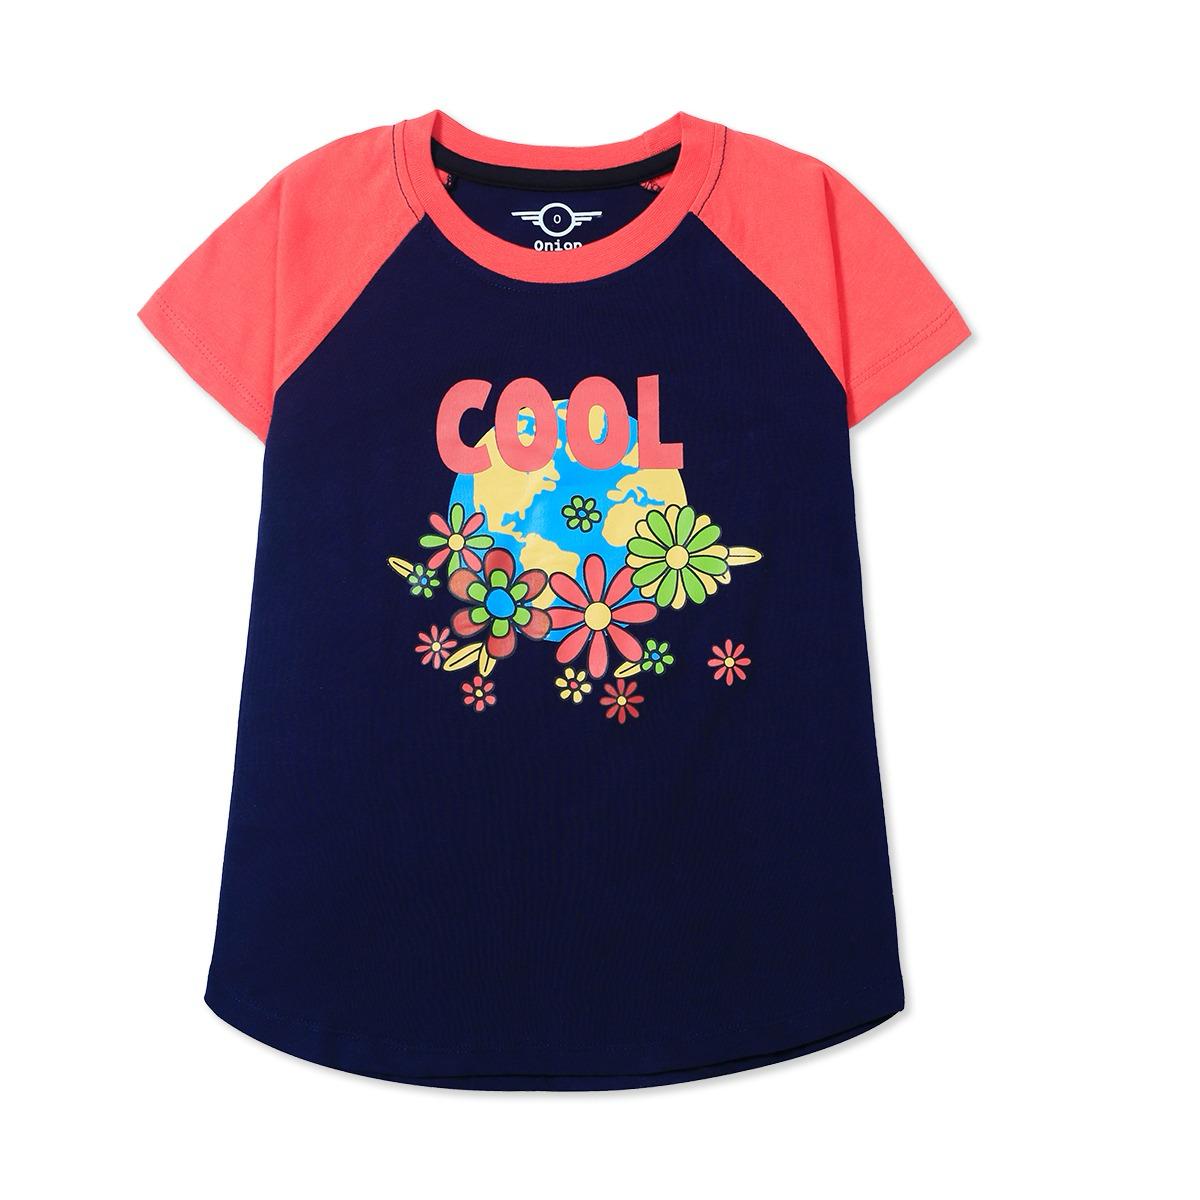 Girls Pure Cotton Floral Graphic T-Shirt